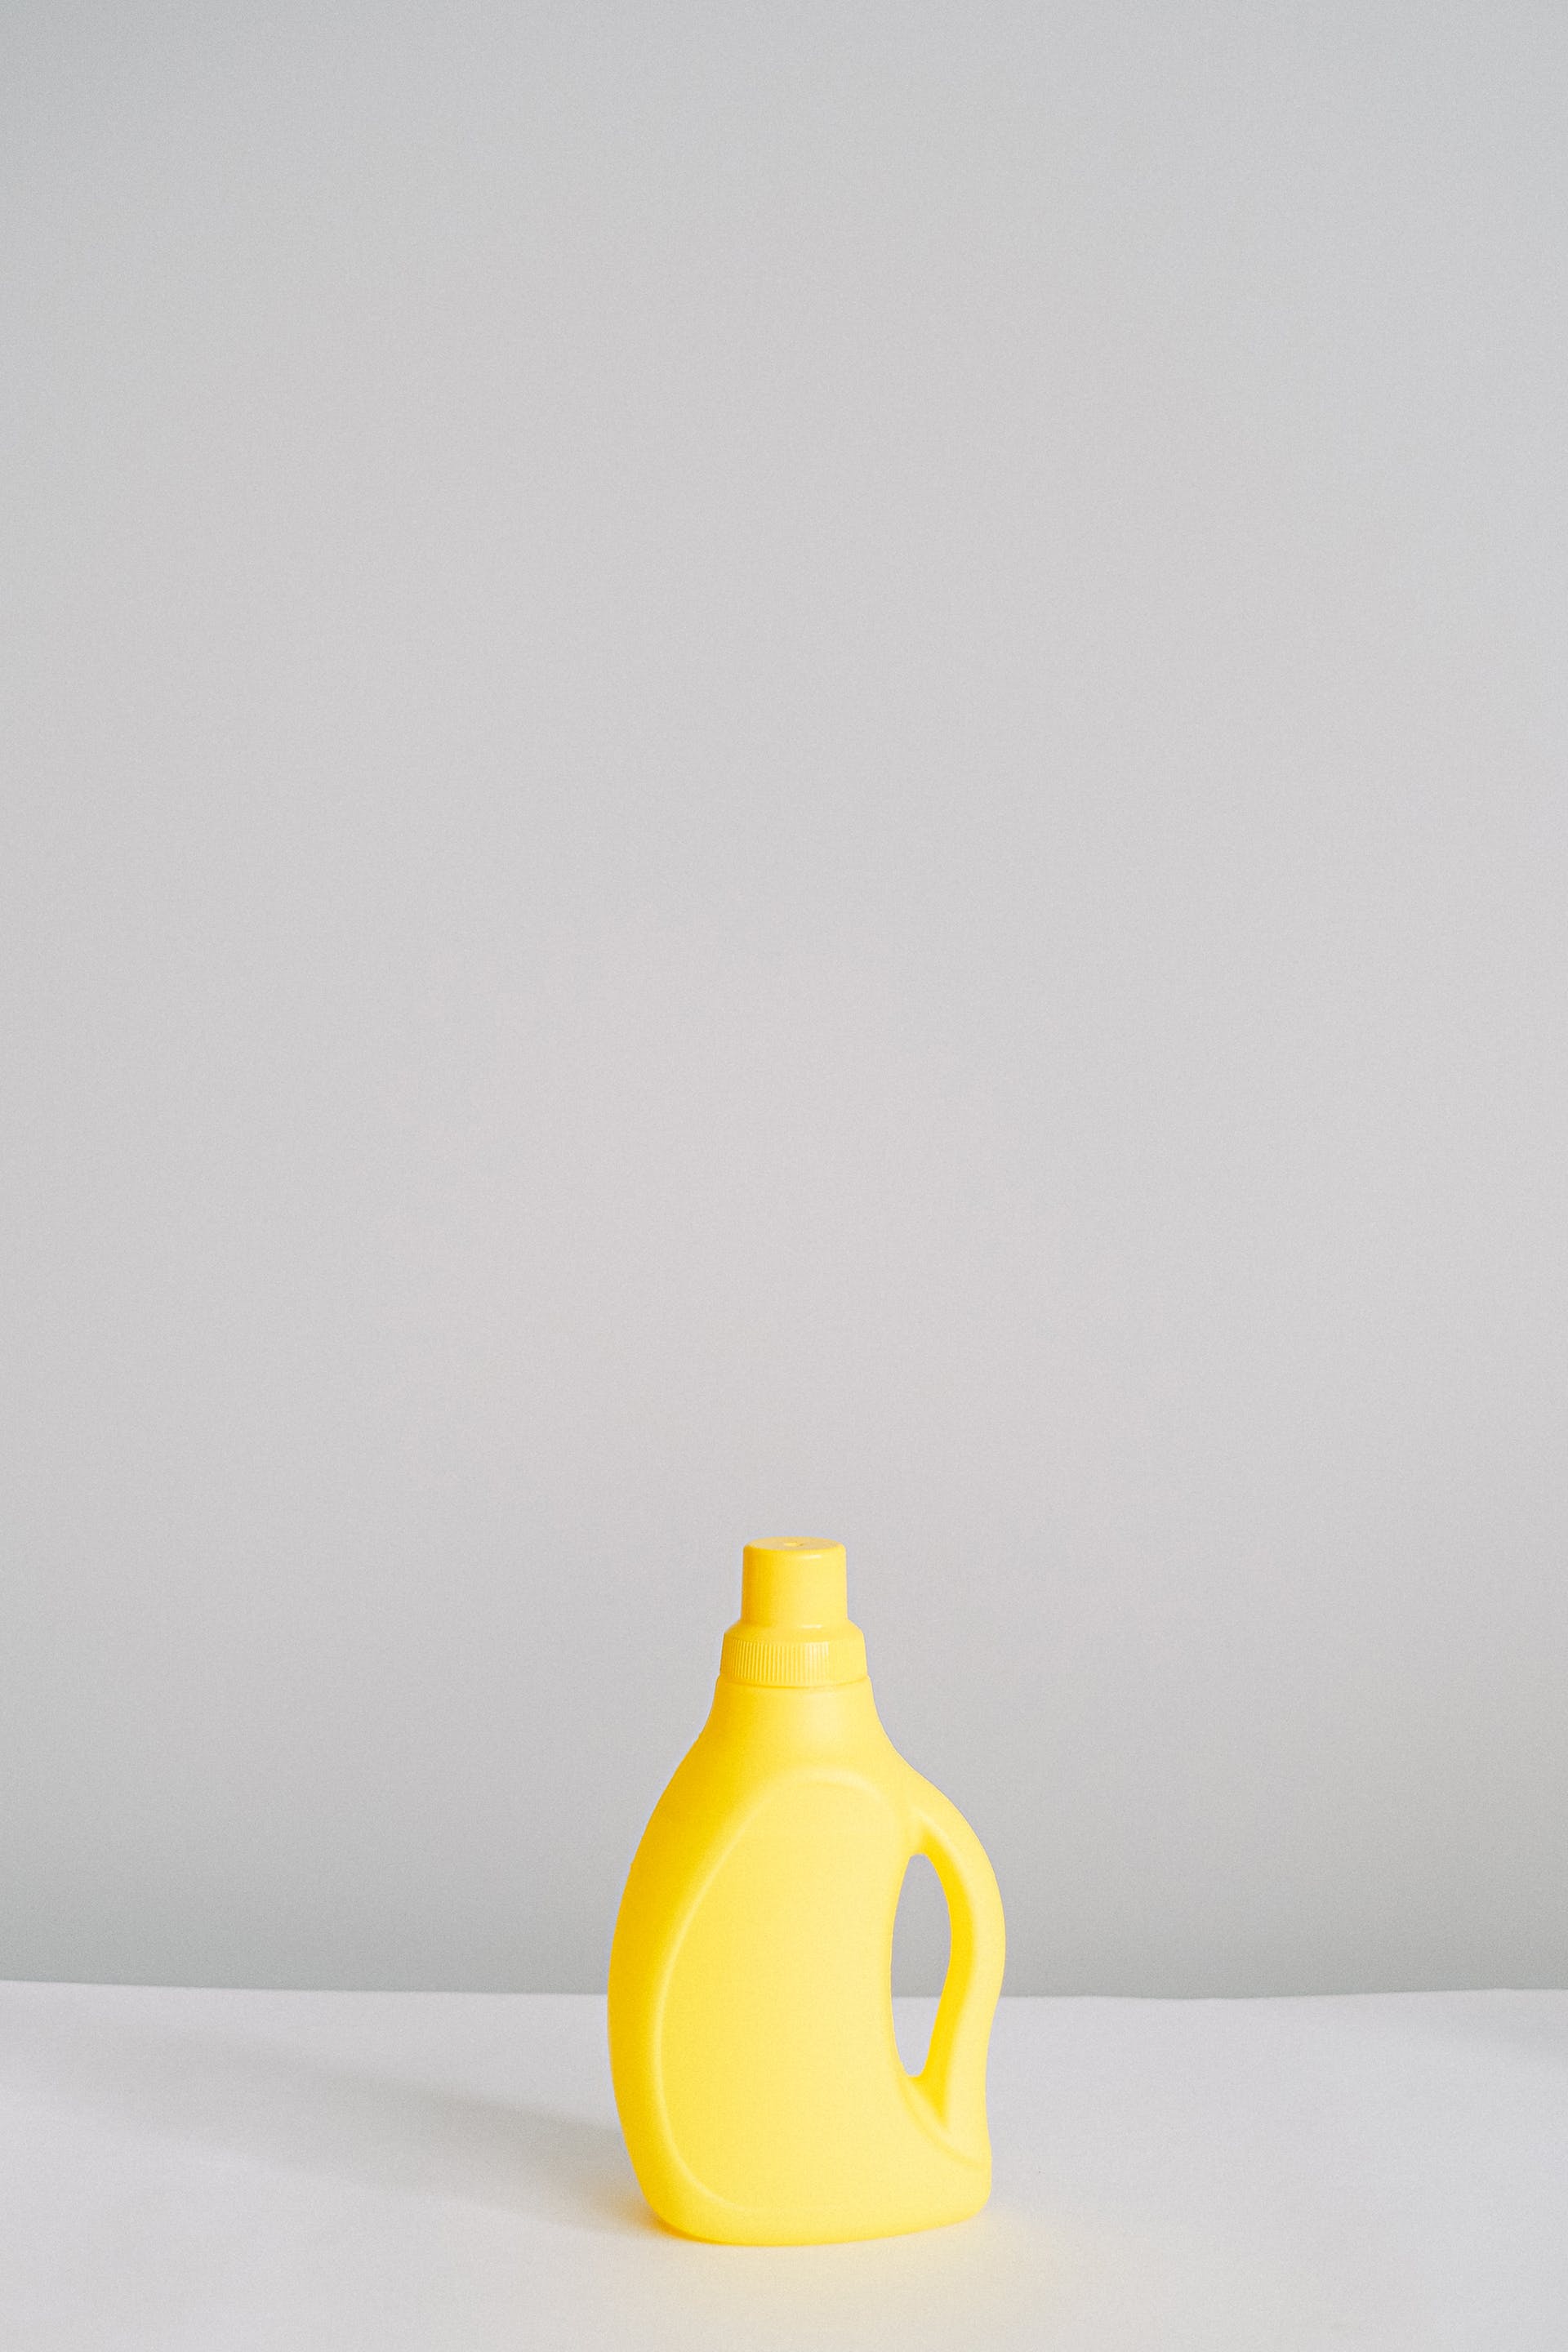 A yellow-colored bottle | Source: Pexels